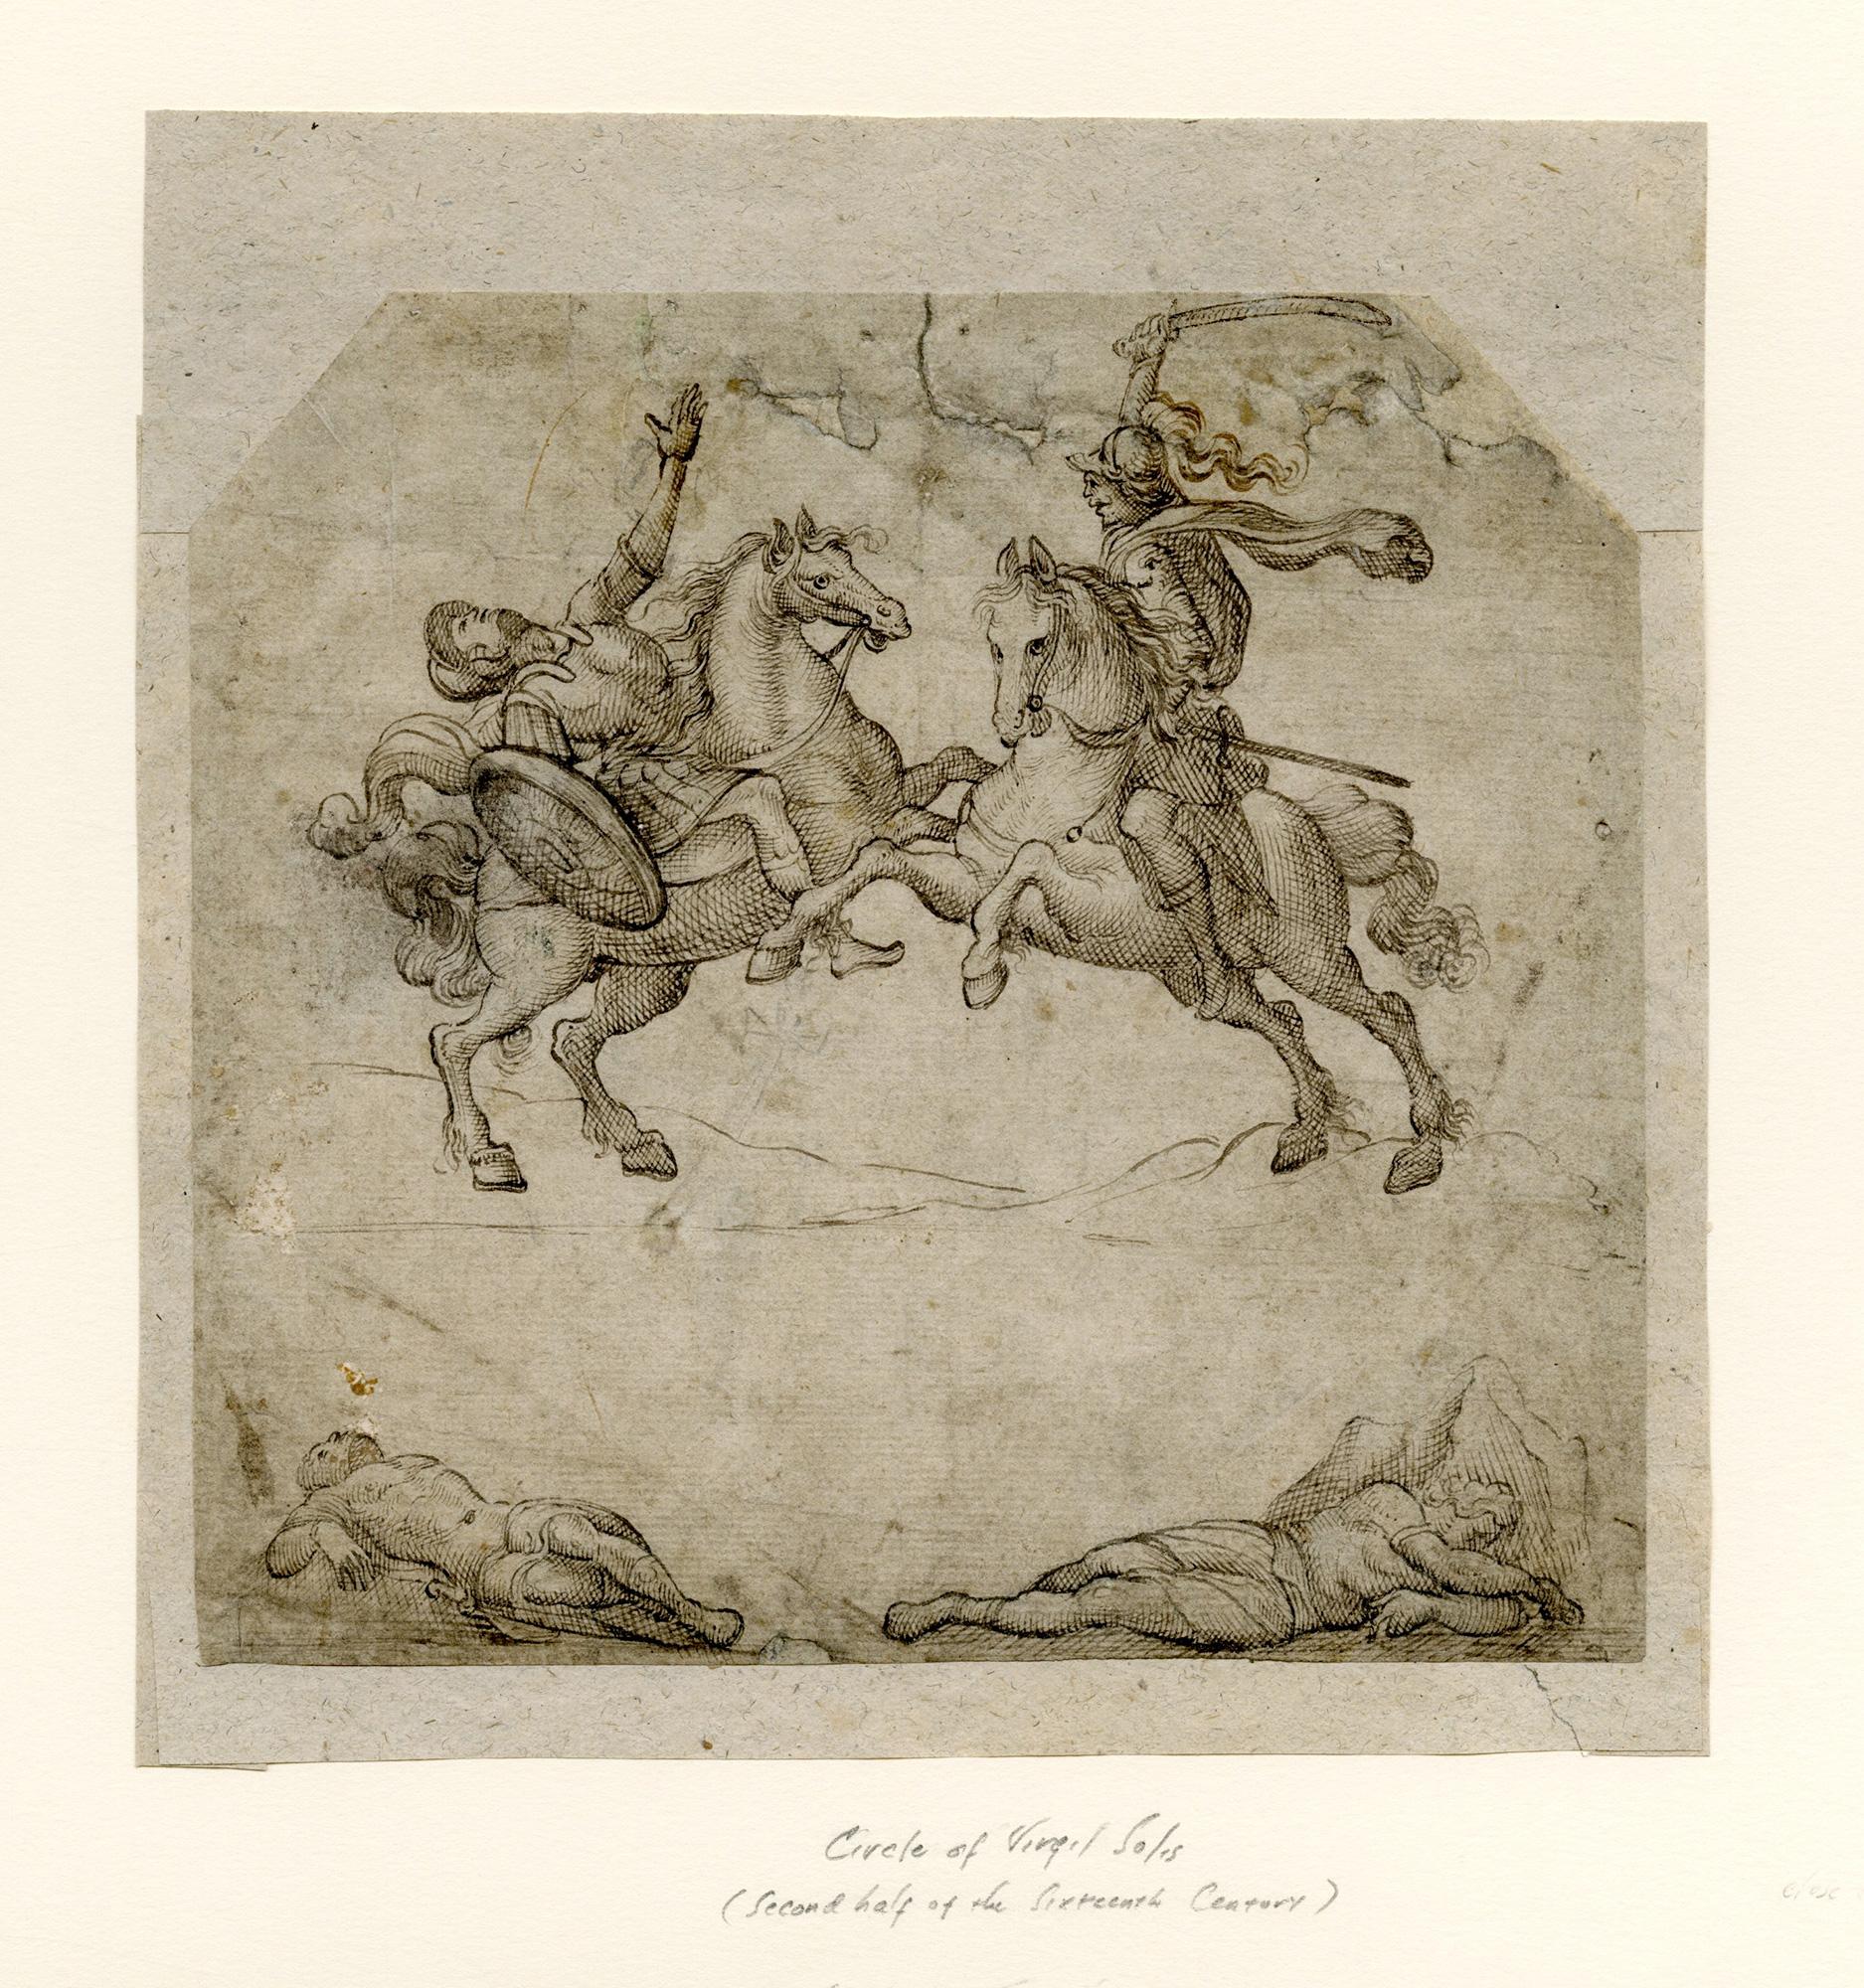 Mythological combat scene with Roman soldiers on horseback. - Art by Virgil Solis